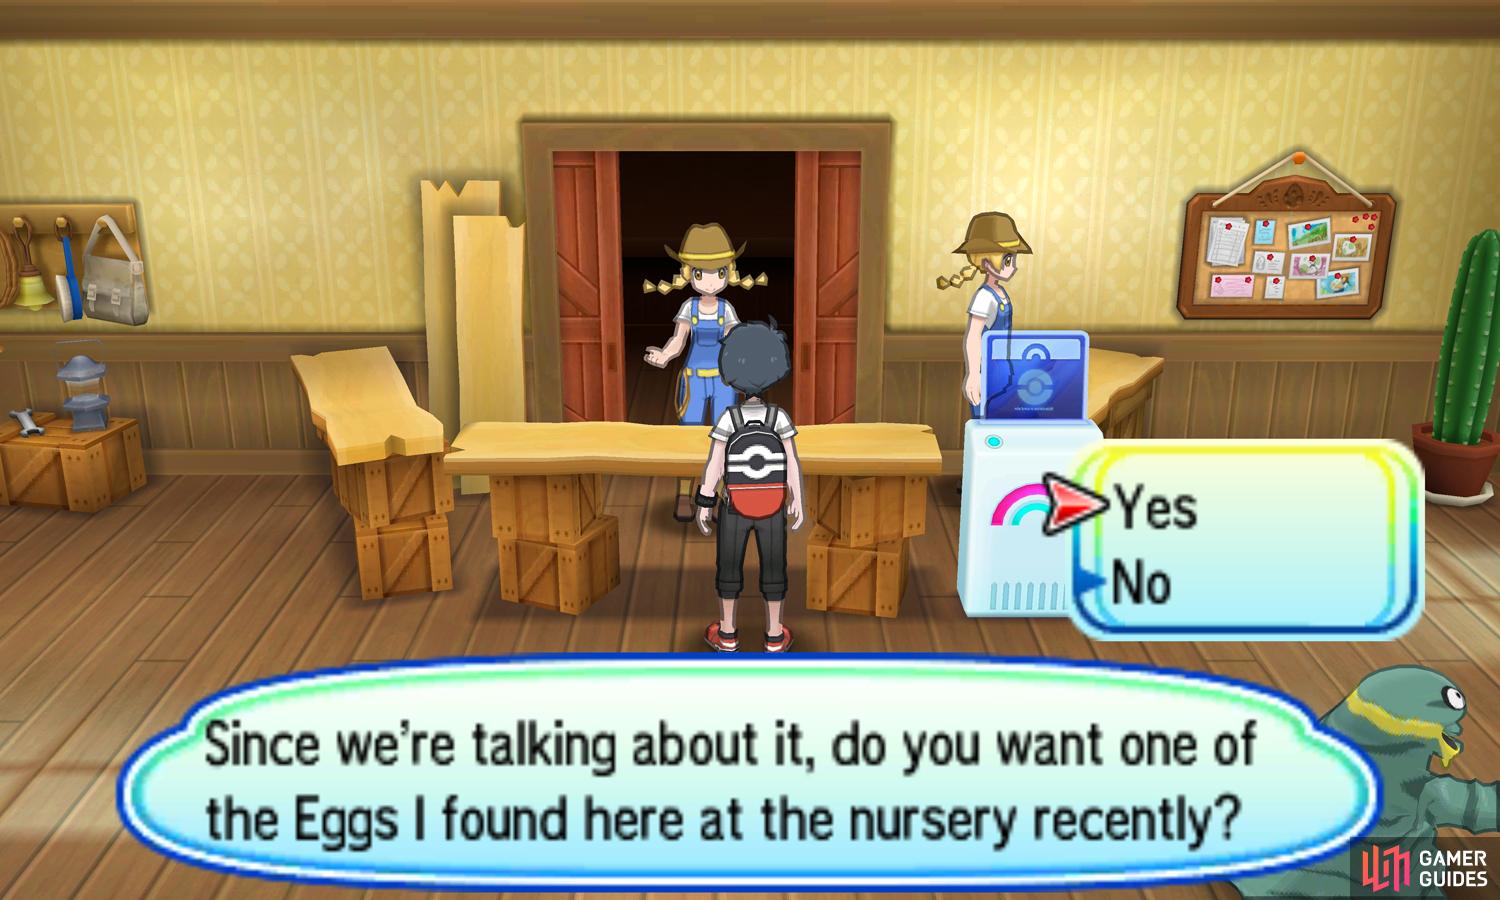 Even with Rotom Dex's help, it'll take a while for the egg to hatch.